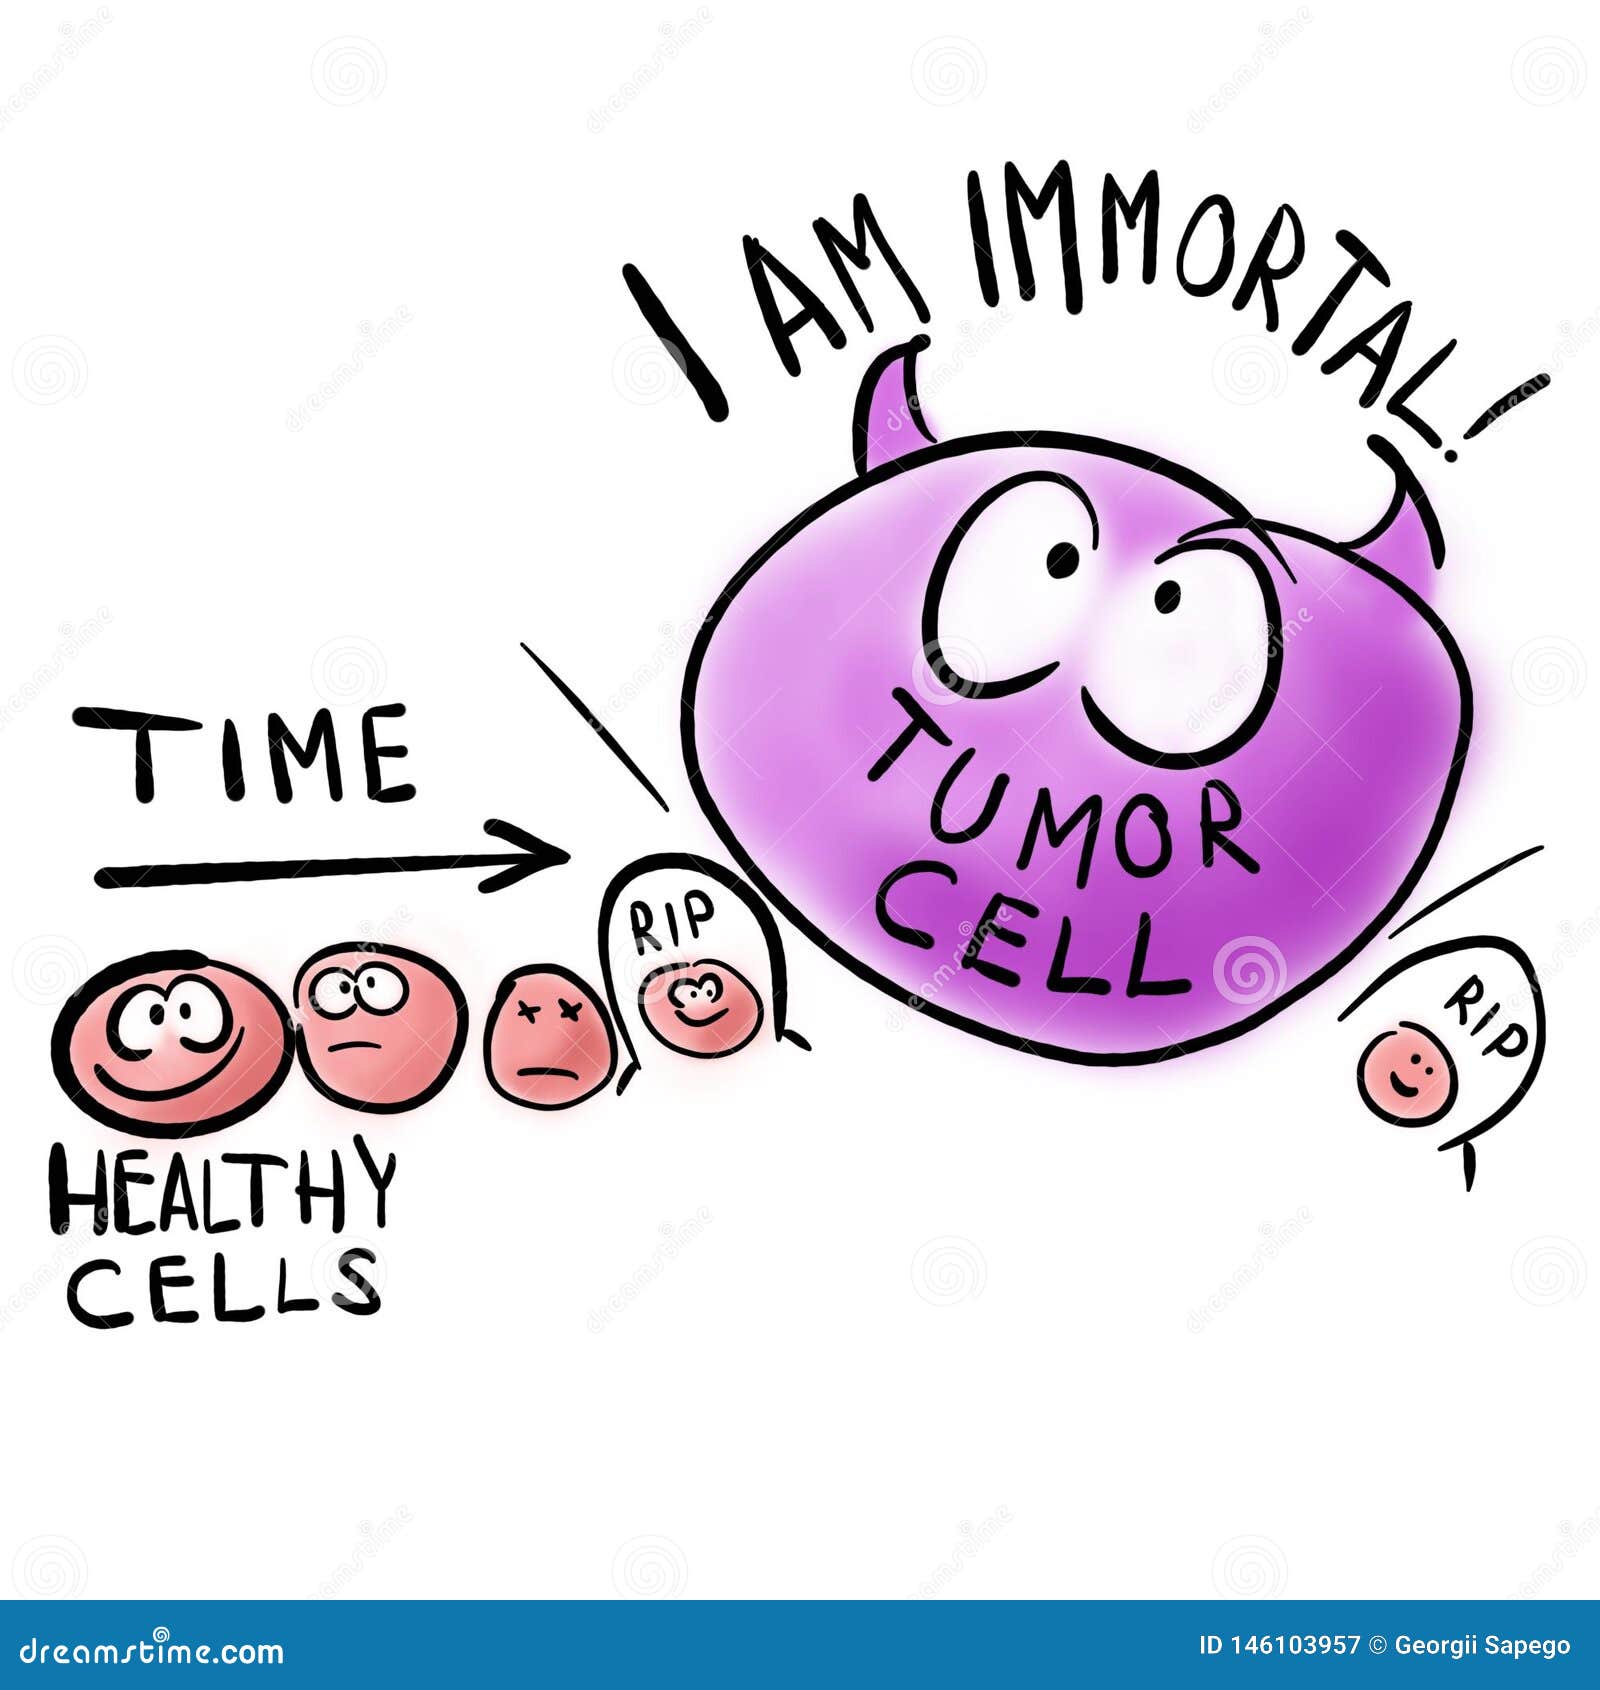 tumor cell is immortal and dangerous